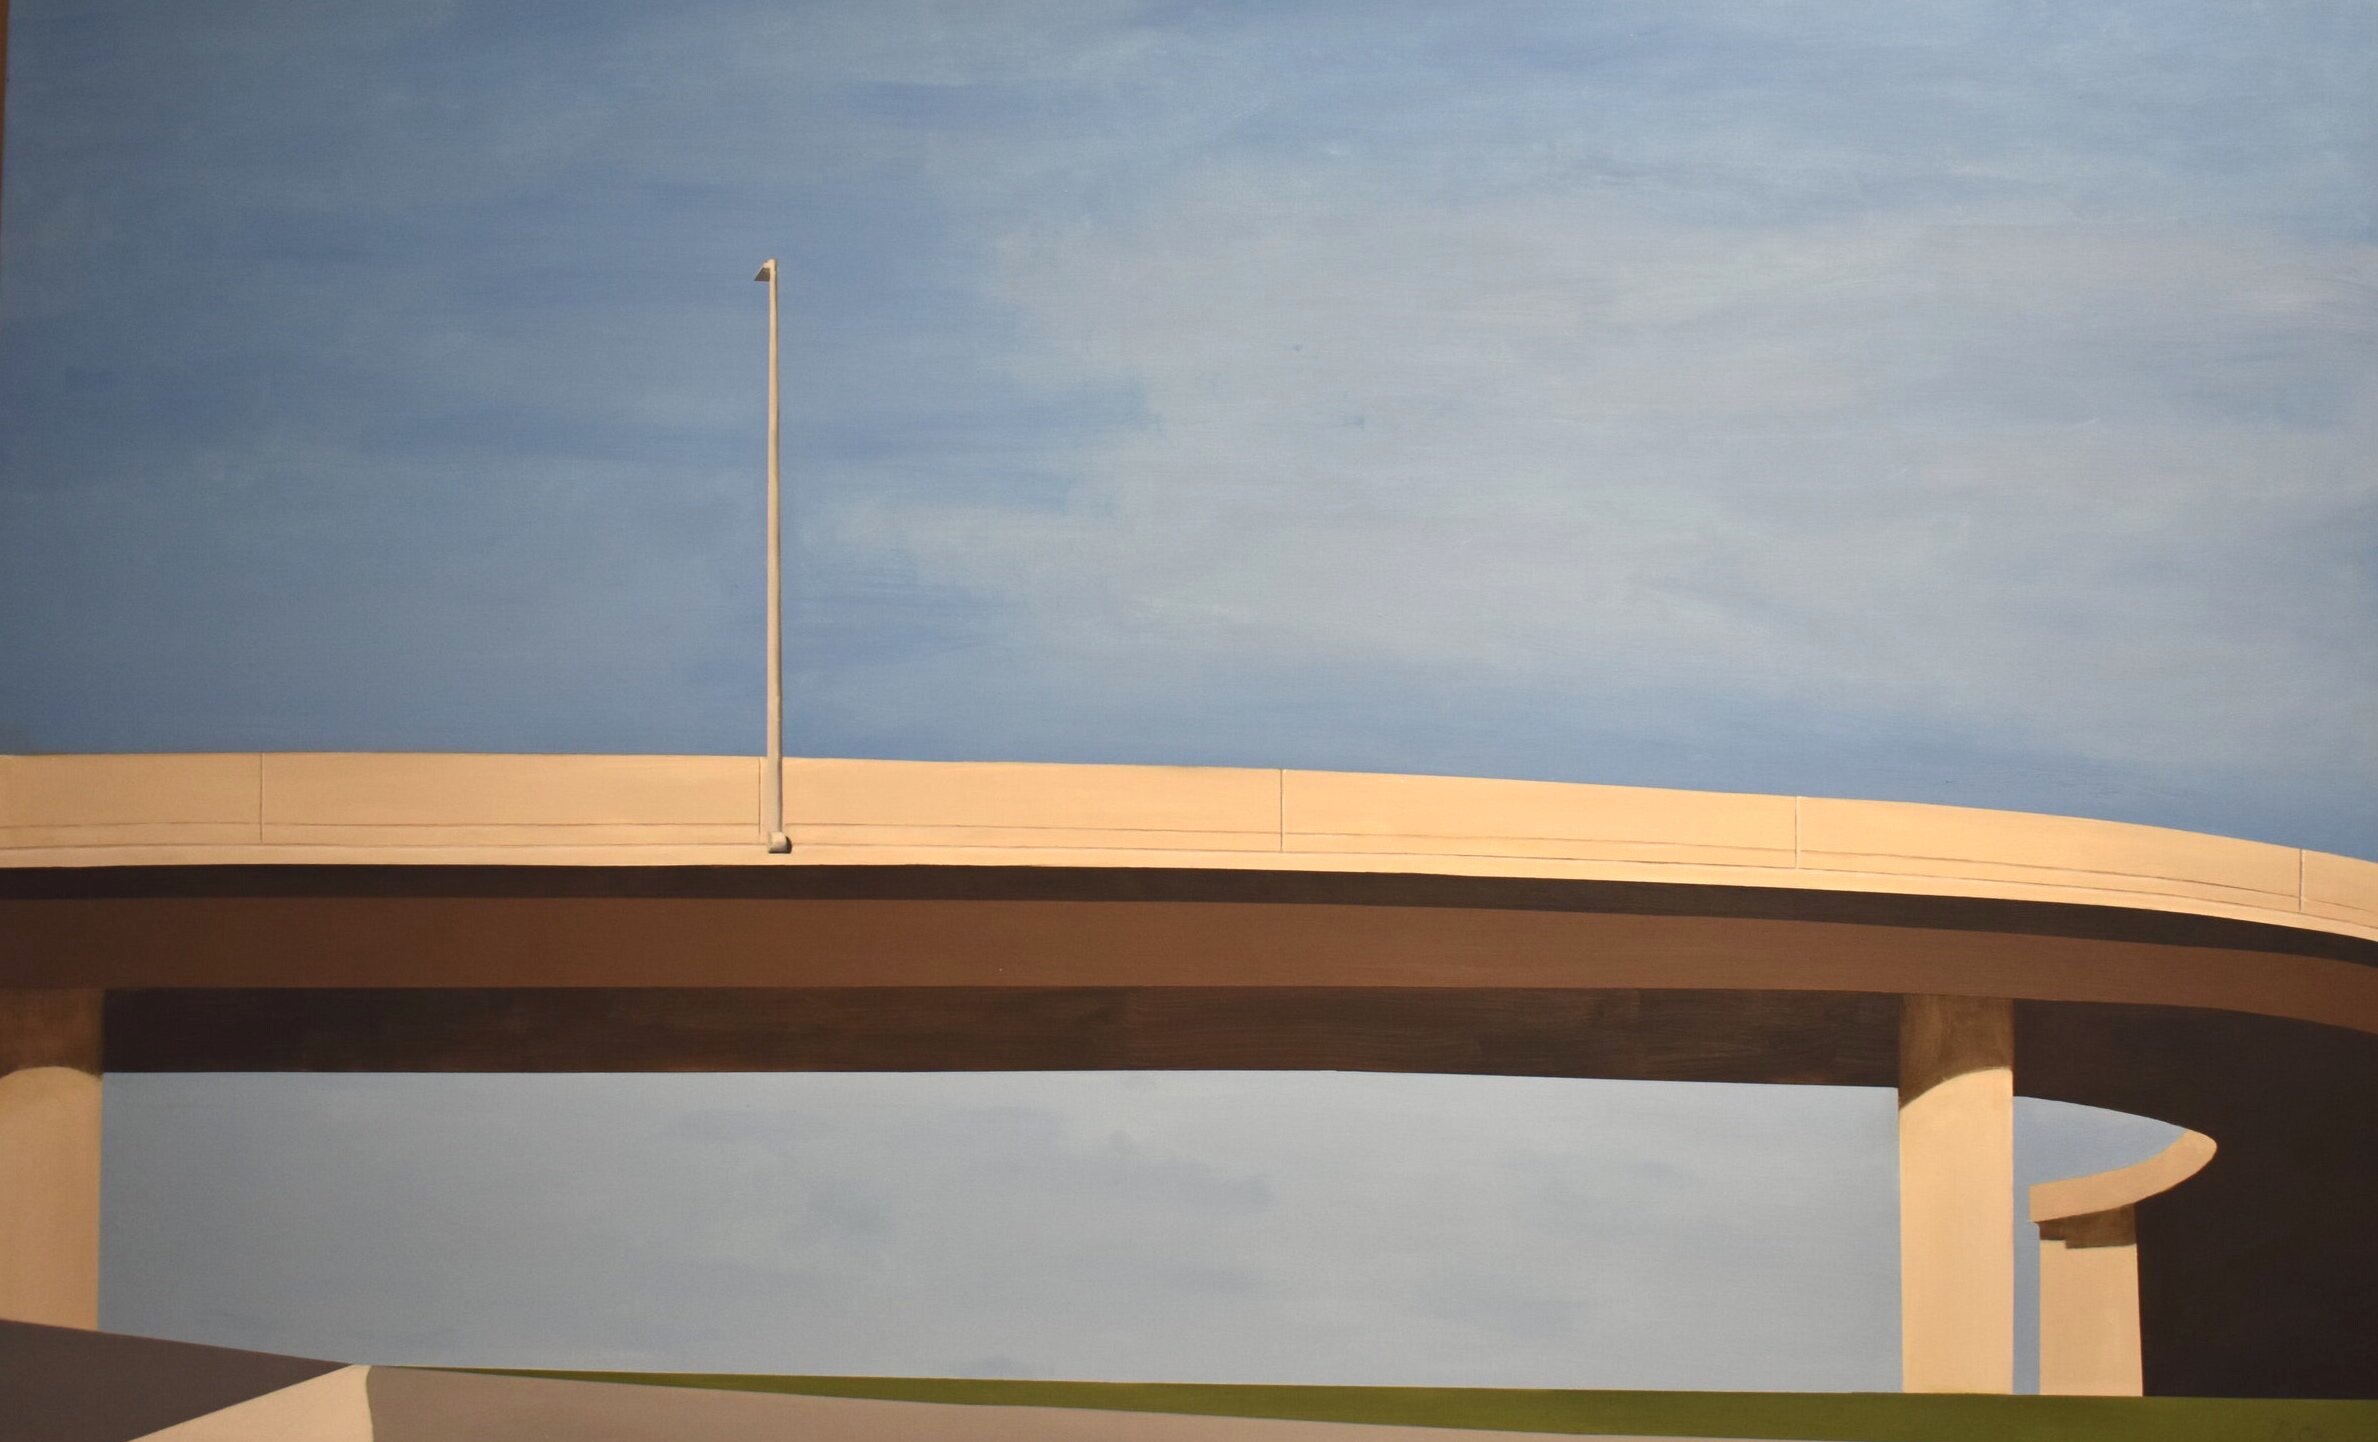  IMMIGRATION ROAD  Oil on Canvas  44” x 72” 